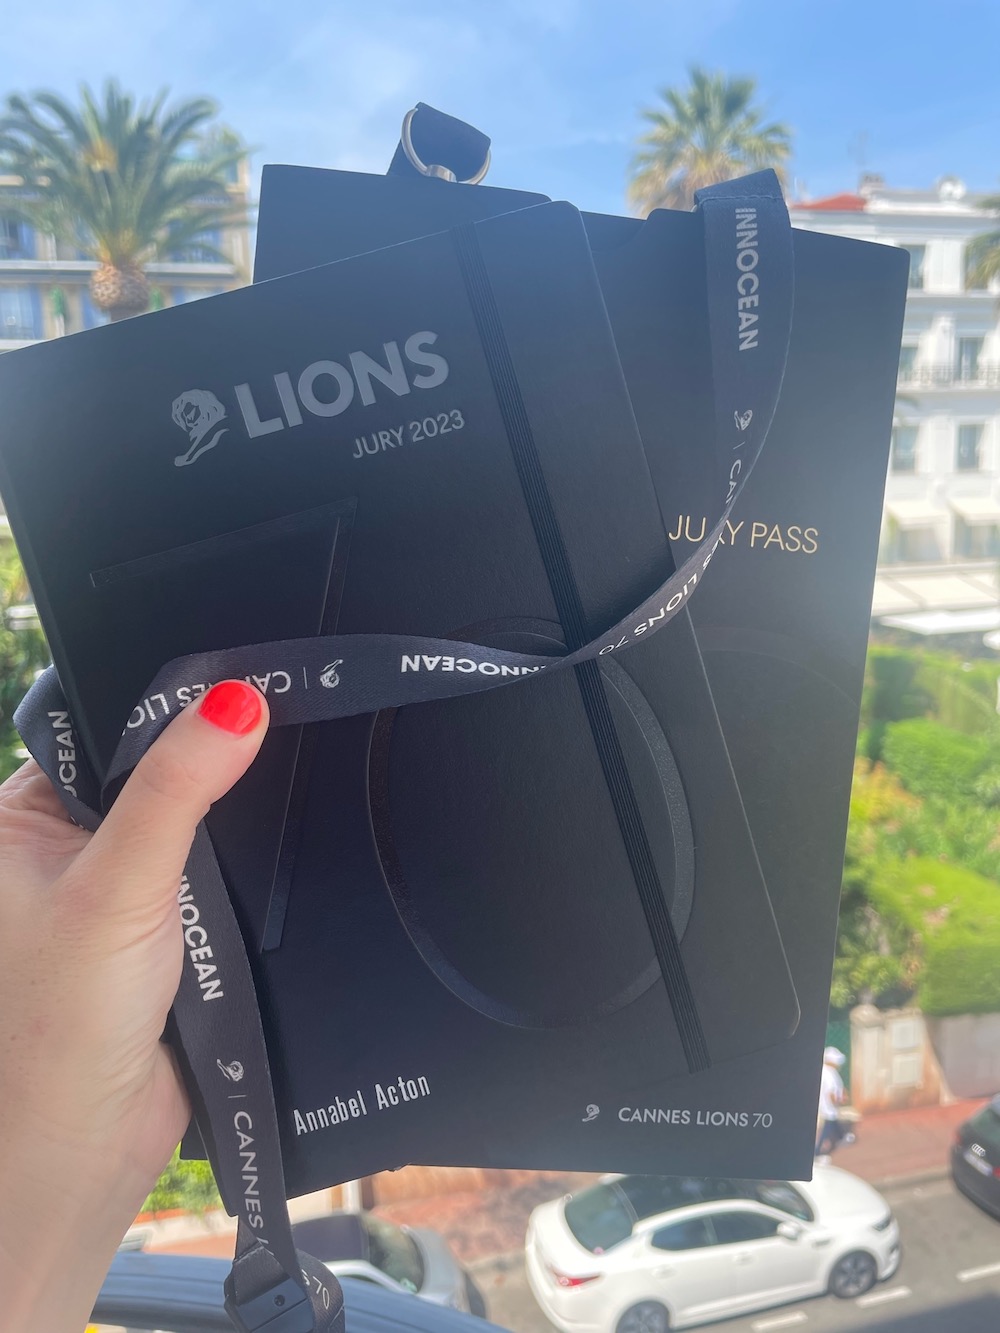 Annabel Acton’s Cannes Diary #1